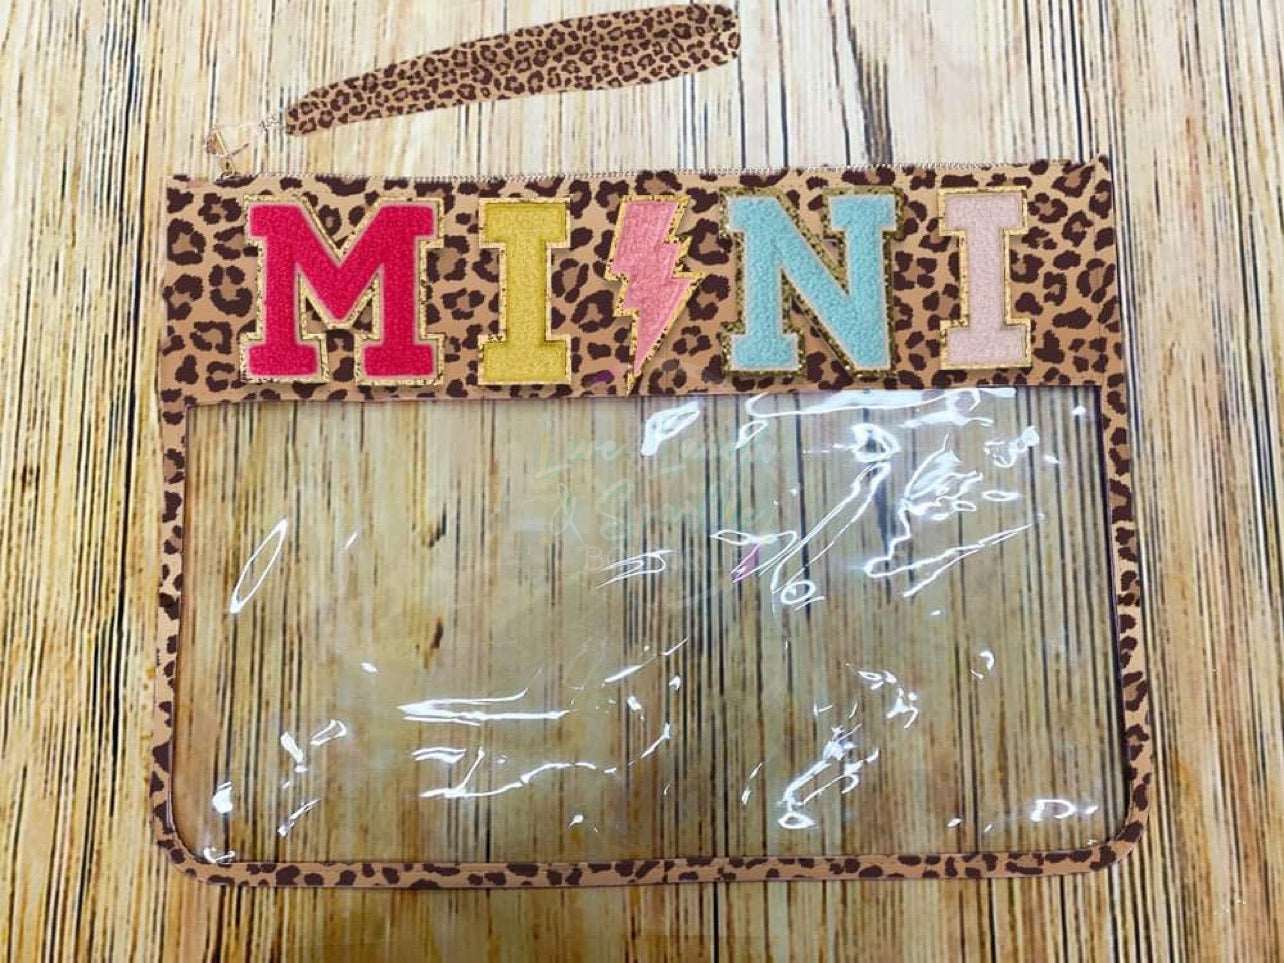 Leopard & clear bag with the word Mini on it.